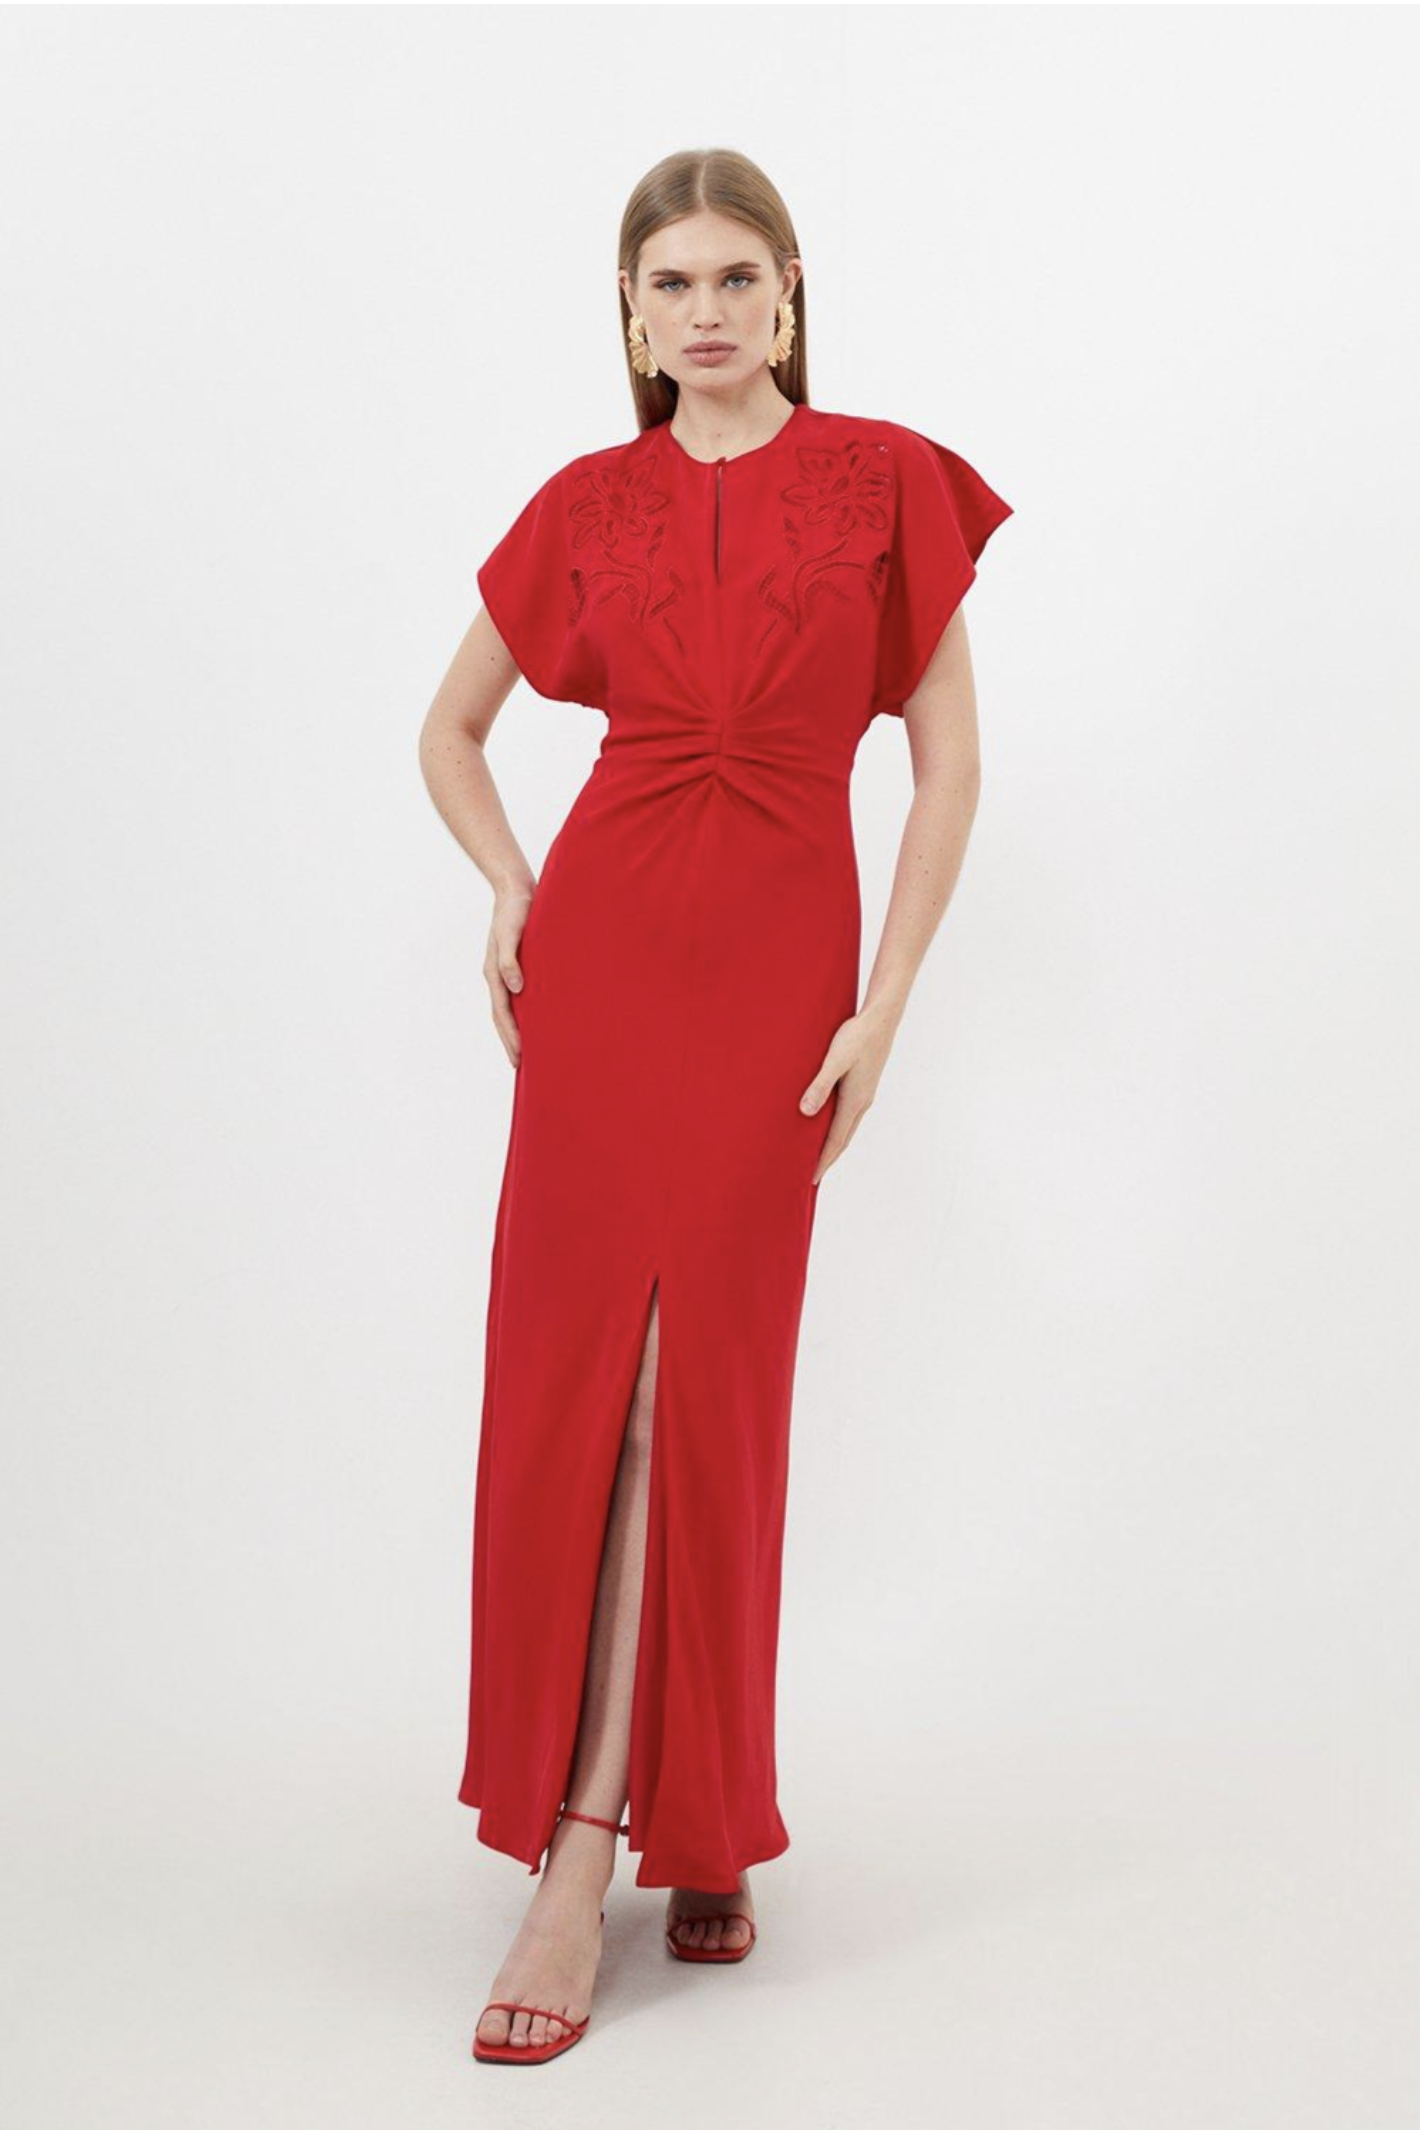 Explore the perfect red maxi dress for any occasion with our handpicked selection. From elegant evenings to casual days, find your ideal silhouette and style. Red Maxi Dress | Red Maxi Dresses | Red Maxy Dress | Red Dress | Red Dress Outfit | Maxi Dress Outfit | Maxi Dress Outfits | Maxi Dress Casual | Maxi Dresses Outfit | Maxi Dress Formal | Maxi Dress Evening | Maxi Dress Summer | Maxy Dress Casual | Maxi Dress Party | Maxy Dress Outfits | Maxi Dresses Outfits | Maxie Dress Outfits